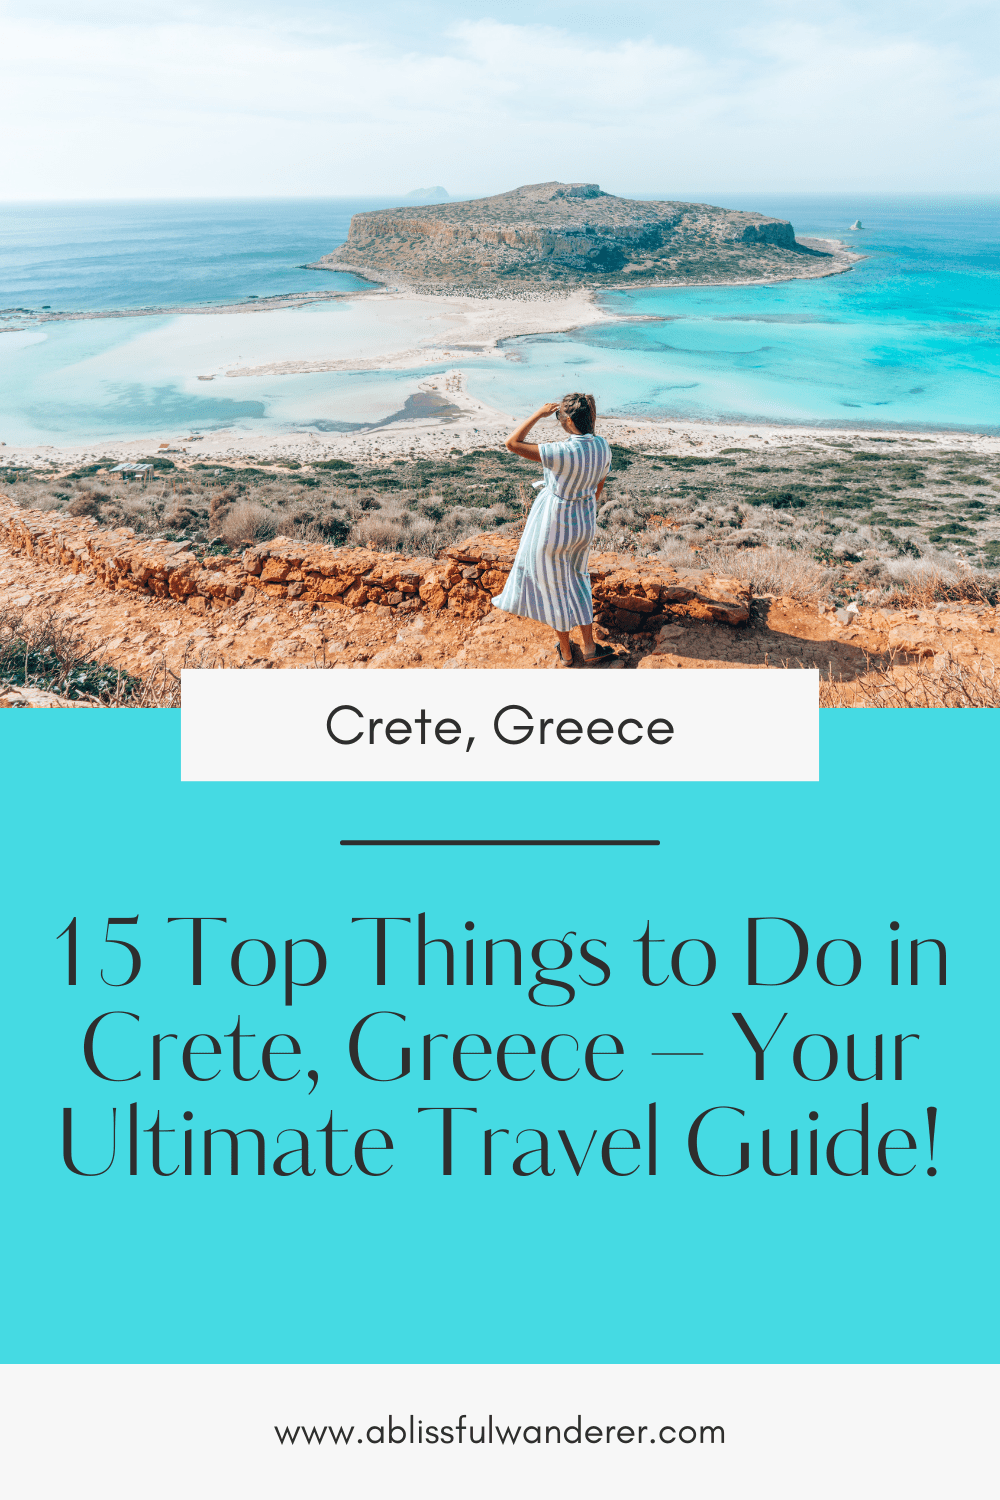 Discover the best of Crete, Greece with our list of 15 top things to do. From exploring ancient ruins to relaxing on pristine beaches, there's something for everyone!